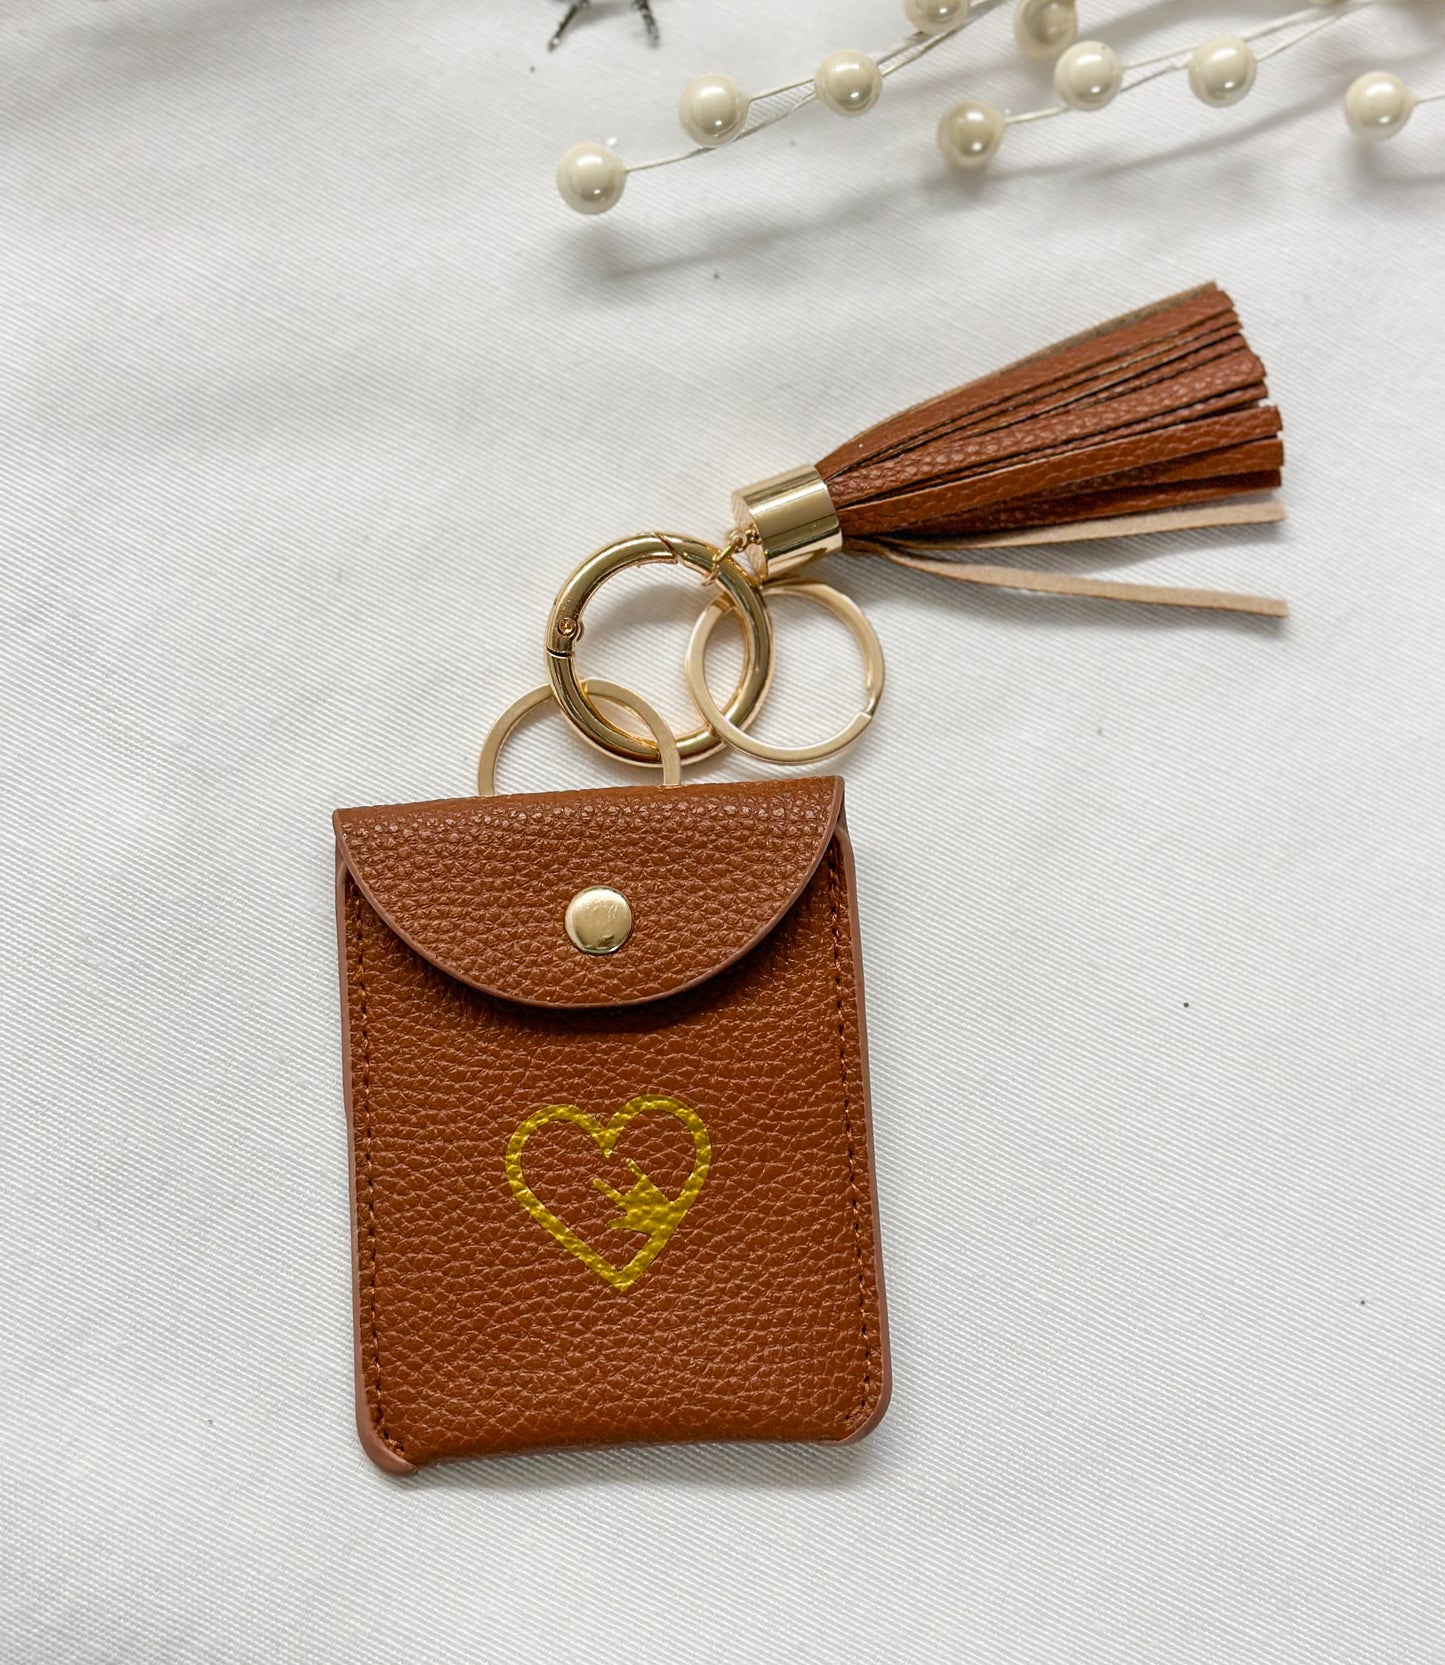 Keychain Wallets Pink, Brown, Black with Gold ILY heart